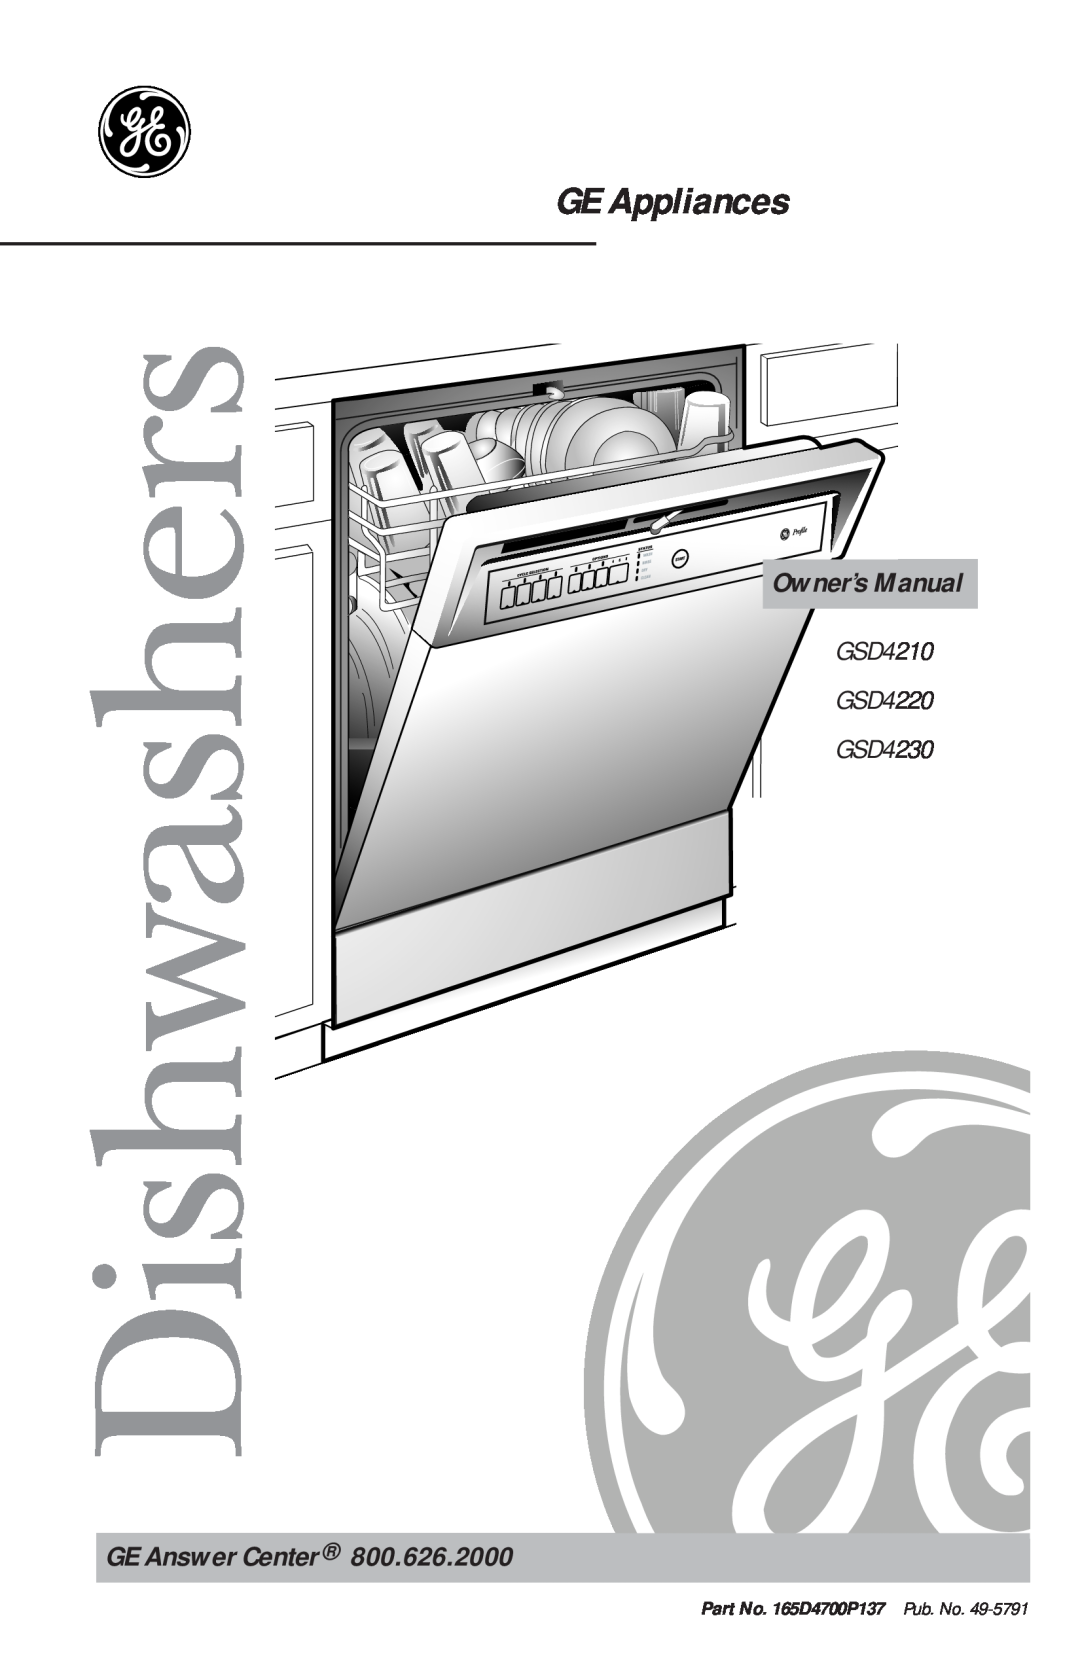 GE owner manual GE Appliances, GE Answer Center, GSD4210 GSD4220 GSD4230, Dishwashers, Part No. 165D4700P137 Pub. No 